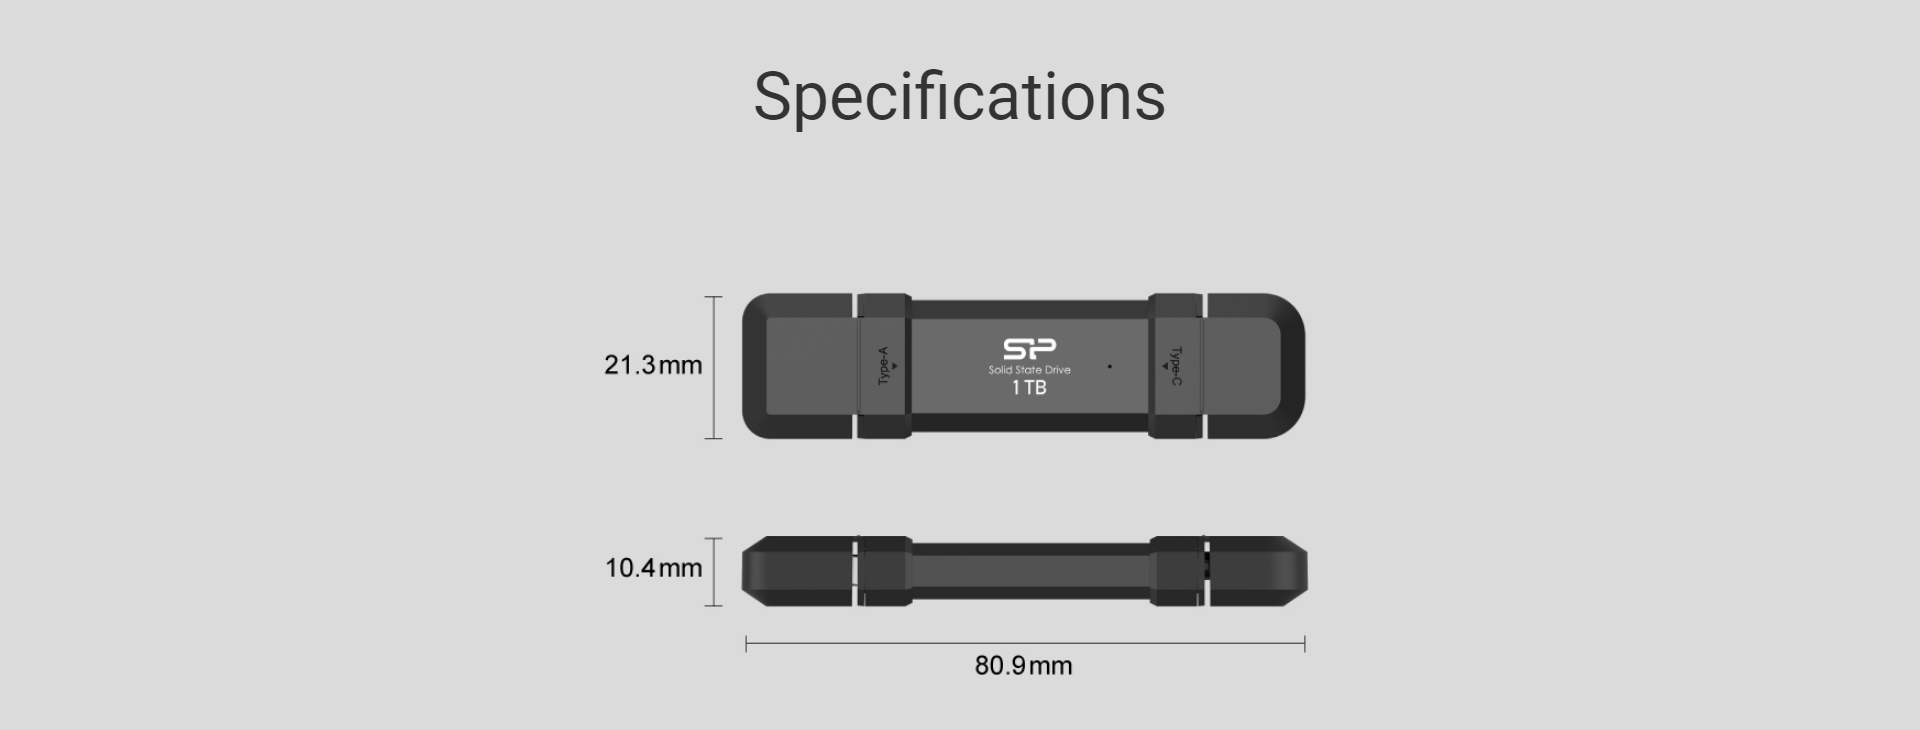 A large marketing image providing additional information about the product Silicon Power DS72 250GB USB Type C & A 3.2 Gen 2 SSD Flash Drive - Black - Additional alt info not provided